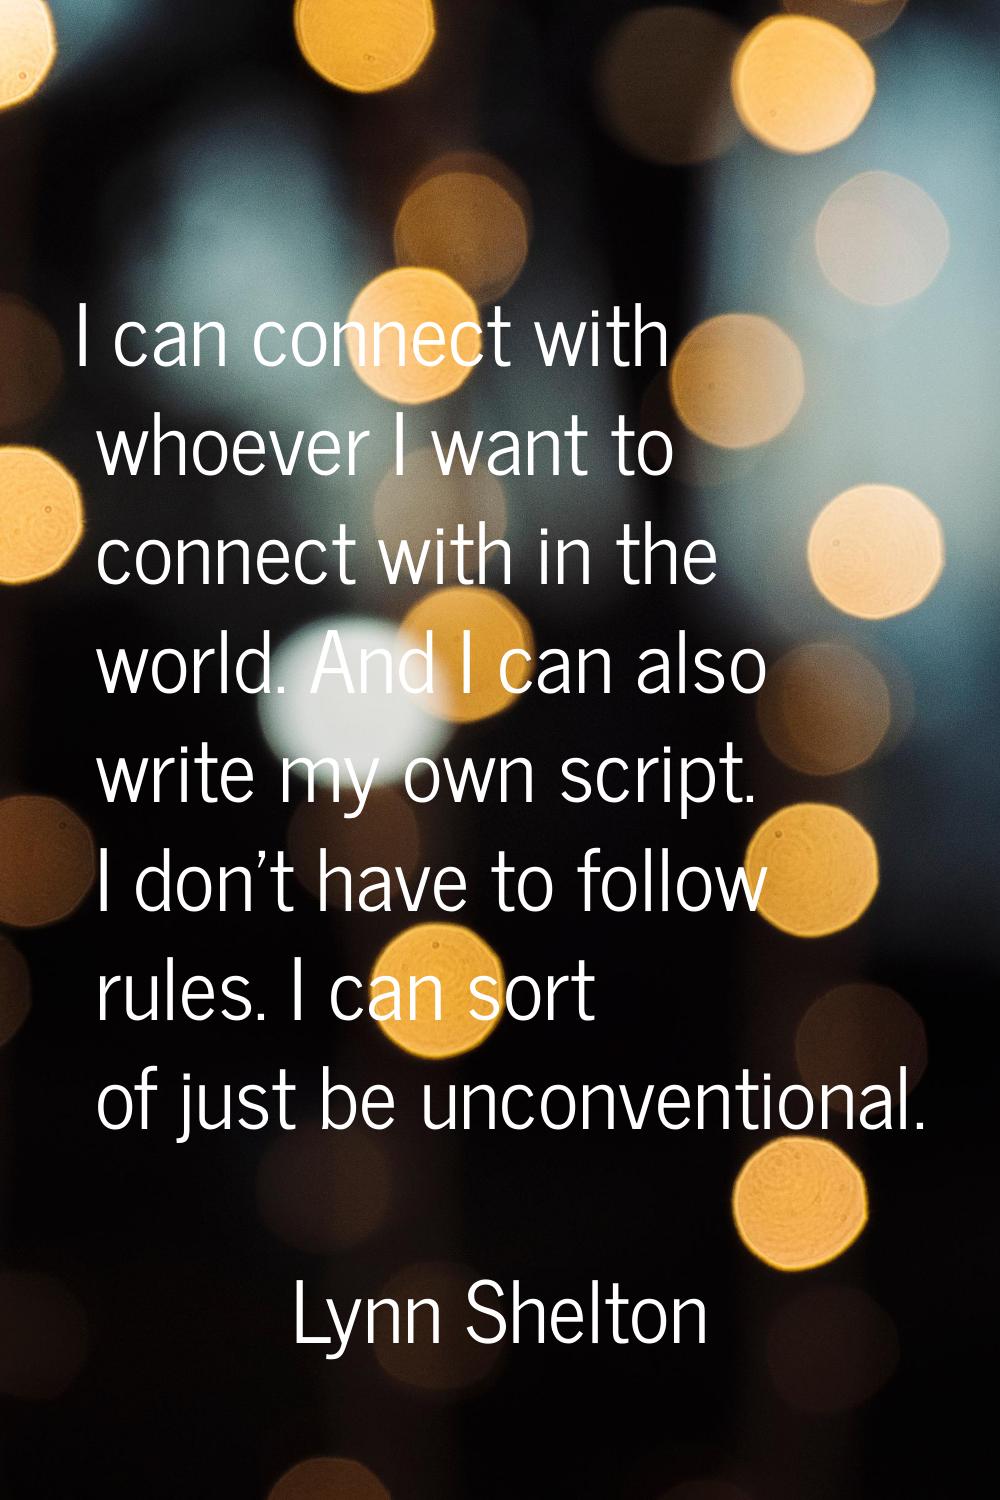 I can connect with whoever I want to connect with in the world. And I can also write my own script.